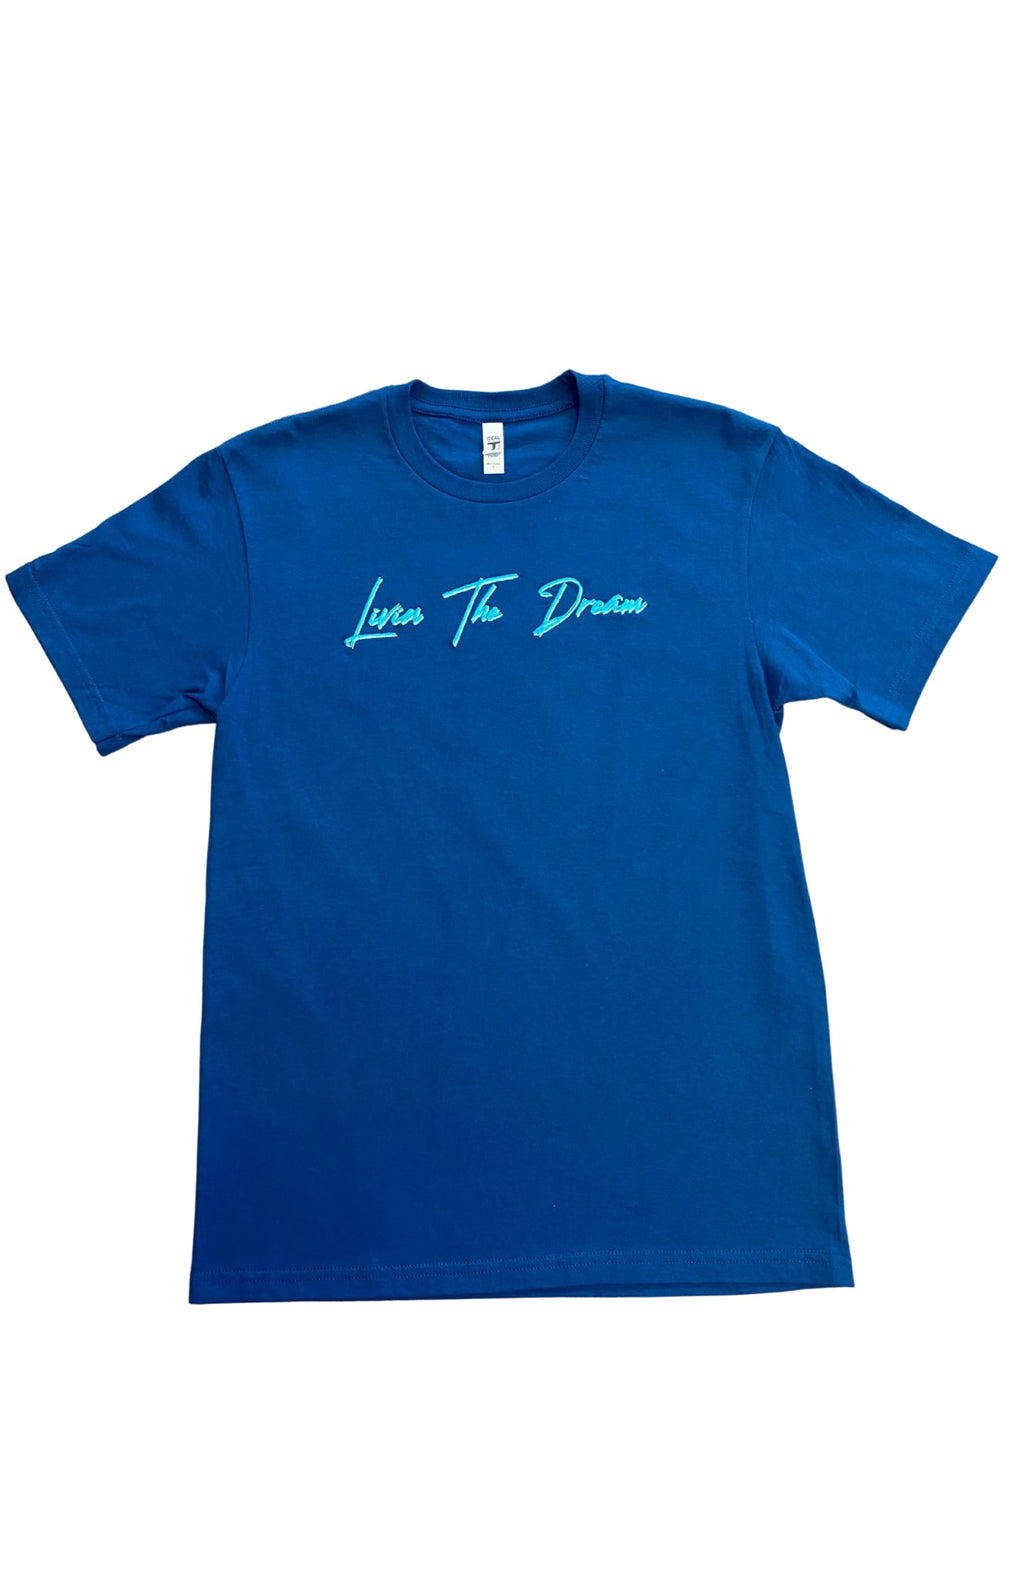 Livin The Dream Collection Tee